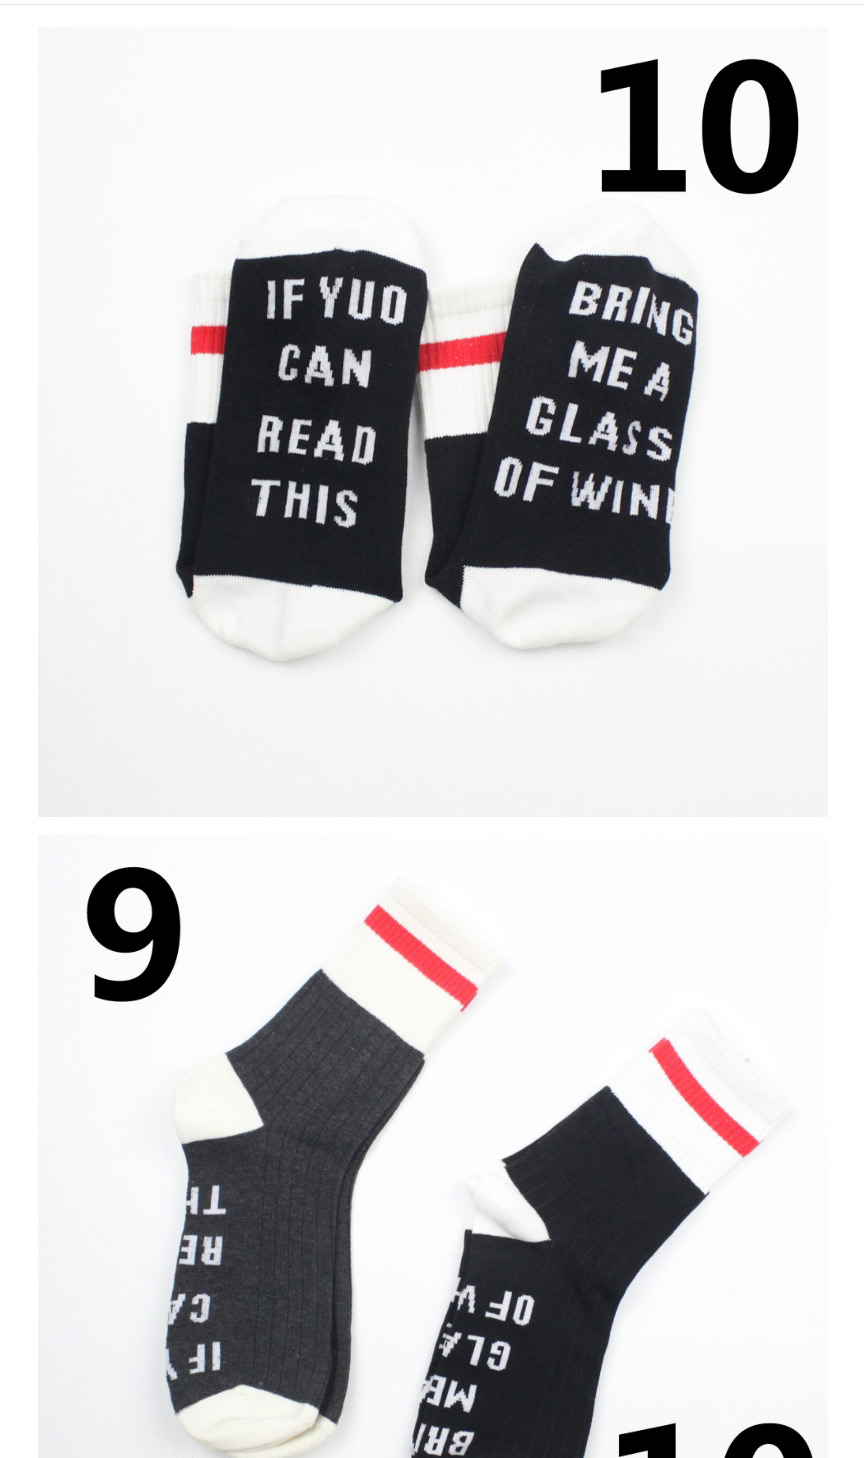 Fashion Grey Wine Red Plantar Letters Hit The Color In The Tube Pile Pile Socks,Fashion Socks